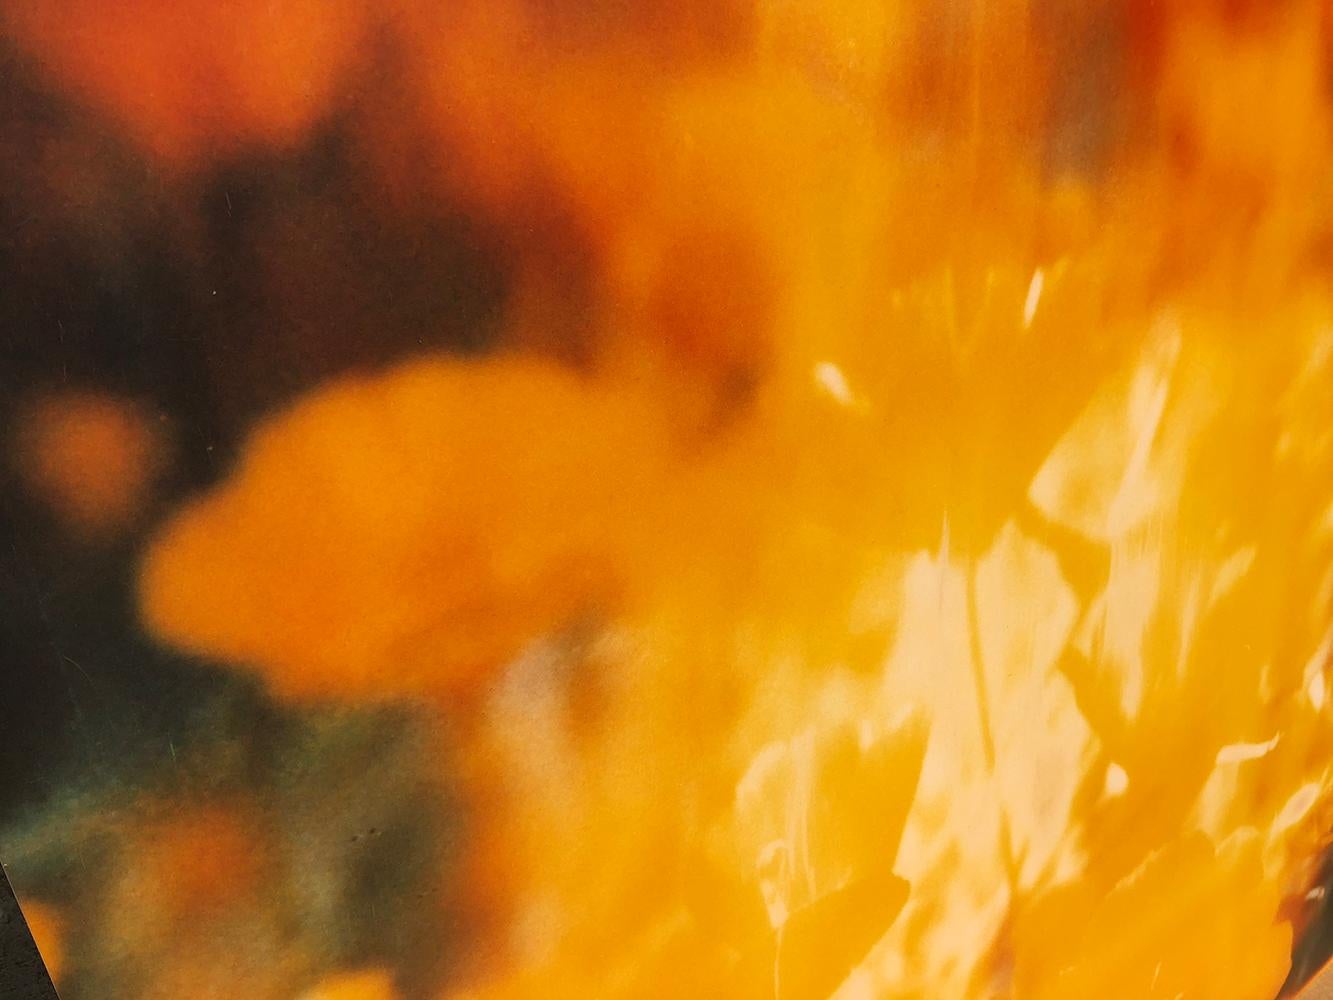 Yellow Flower  - The Last Picture Show, analog, 128x126cm, mounted - Contemporary Photograph by Stefanie Schneider